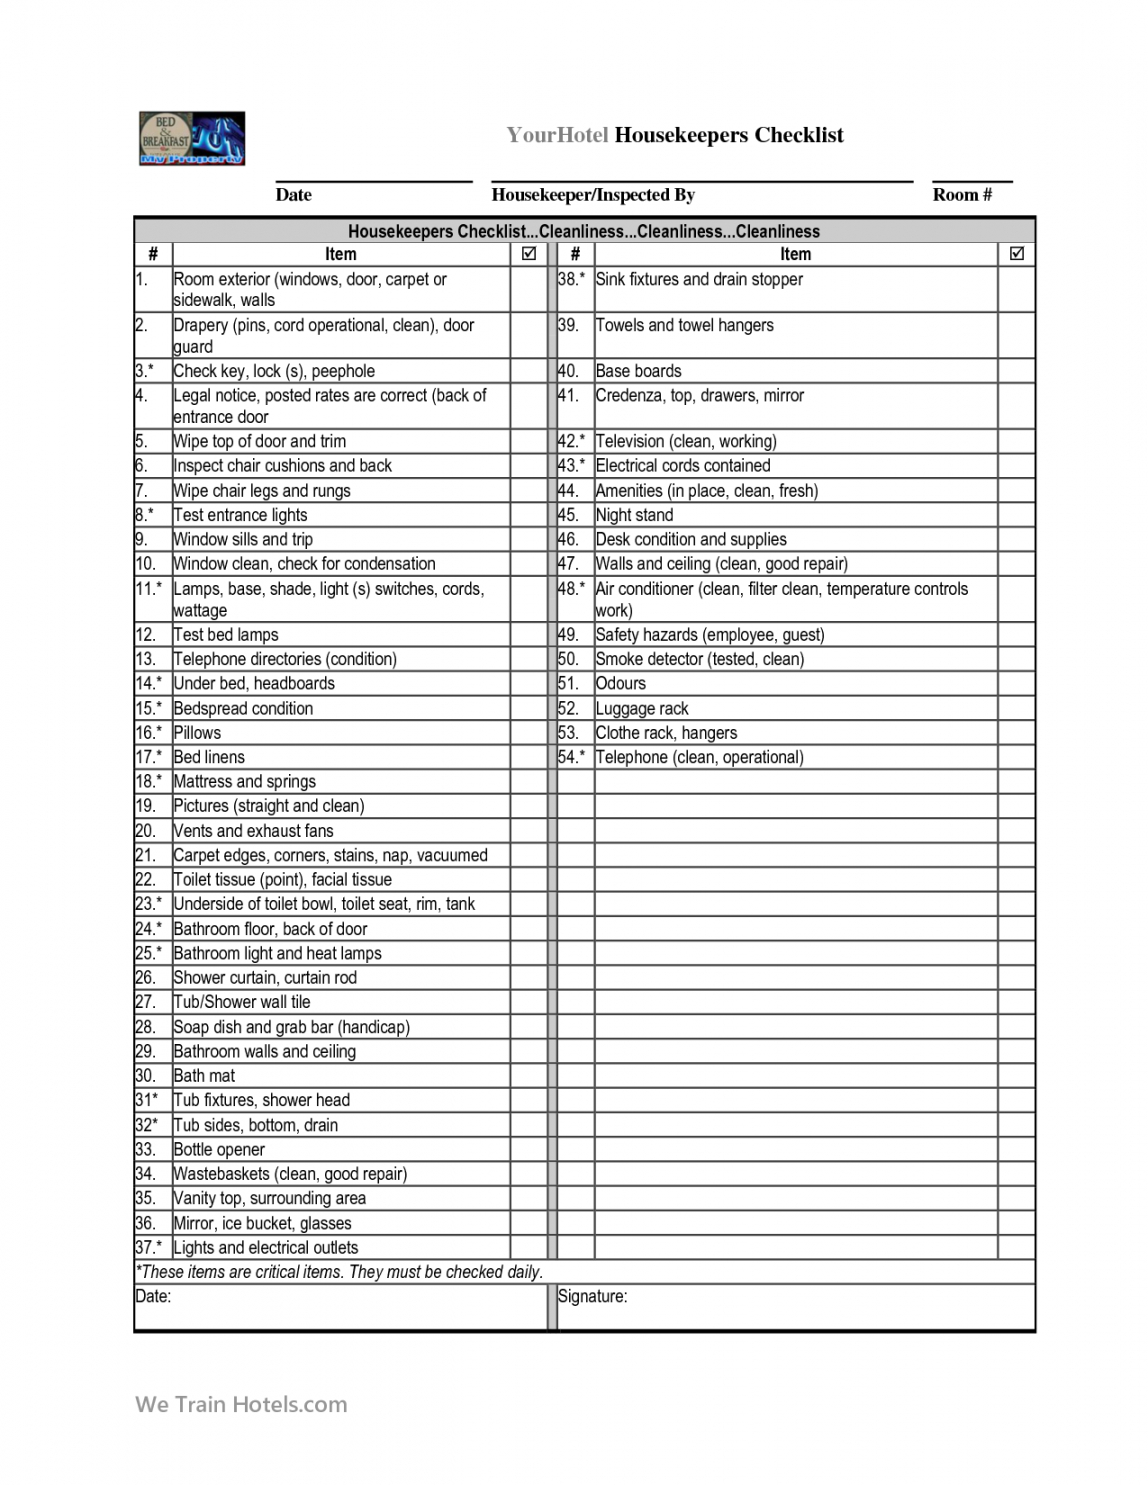 hotel checklist template samples elroomcleaningchecklist house hotel inspection checklist template examples